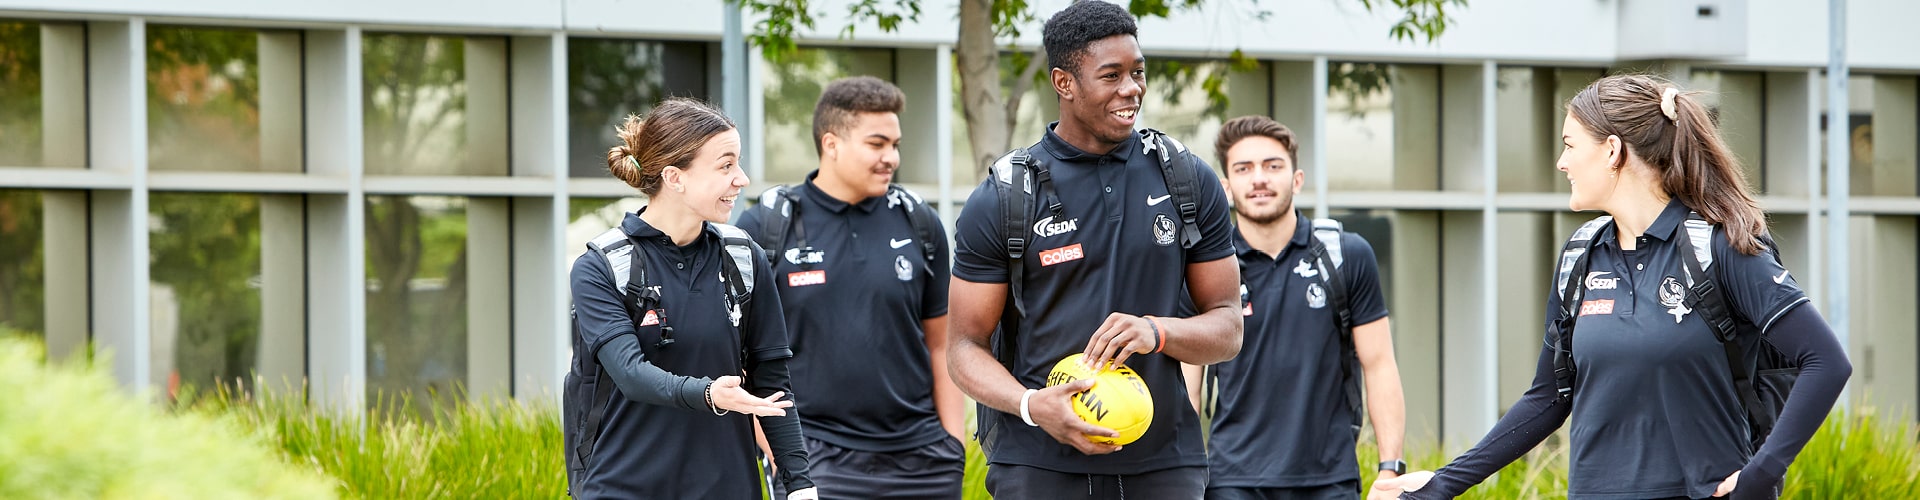 A group of Collingwood Magpies Sport & Business Program students walking together and laughing